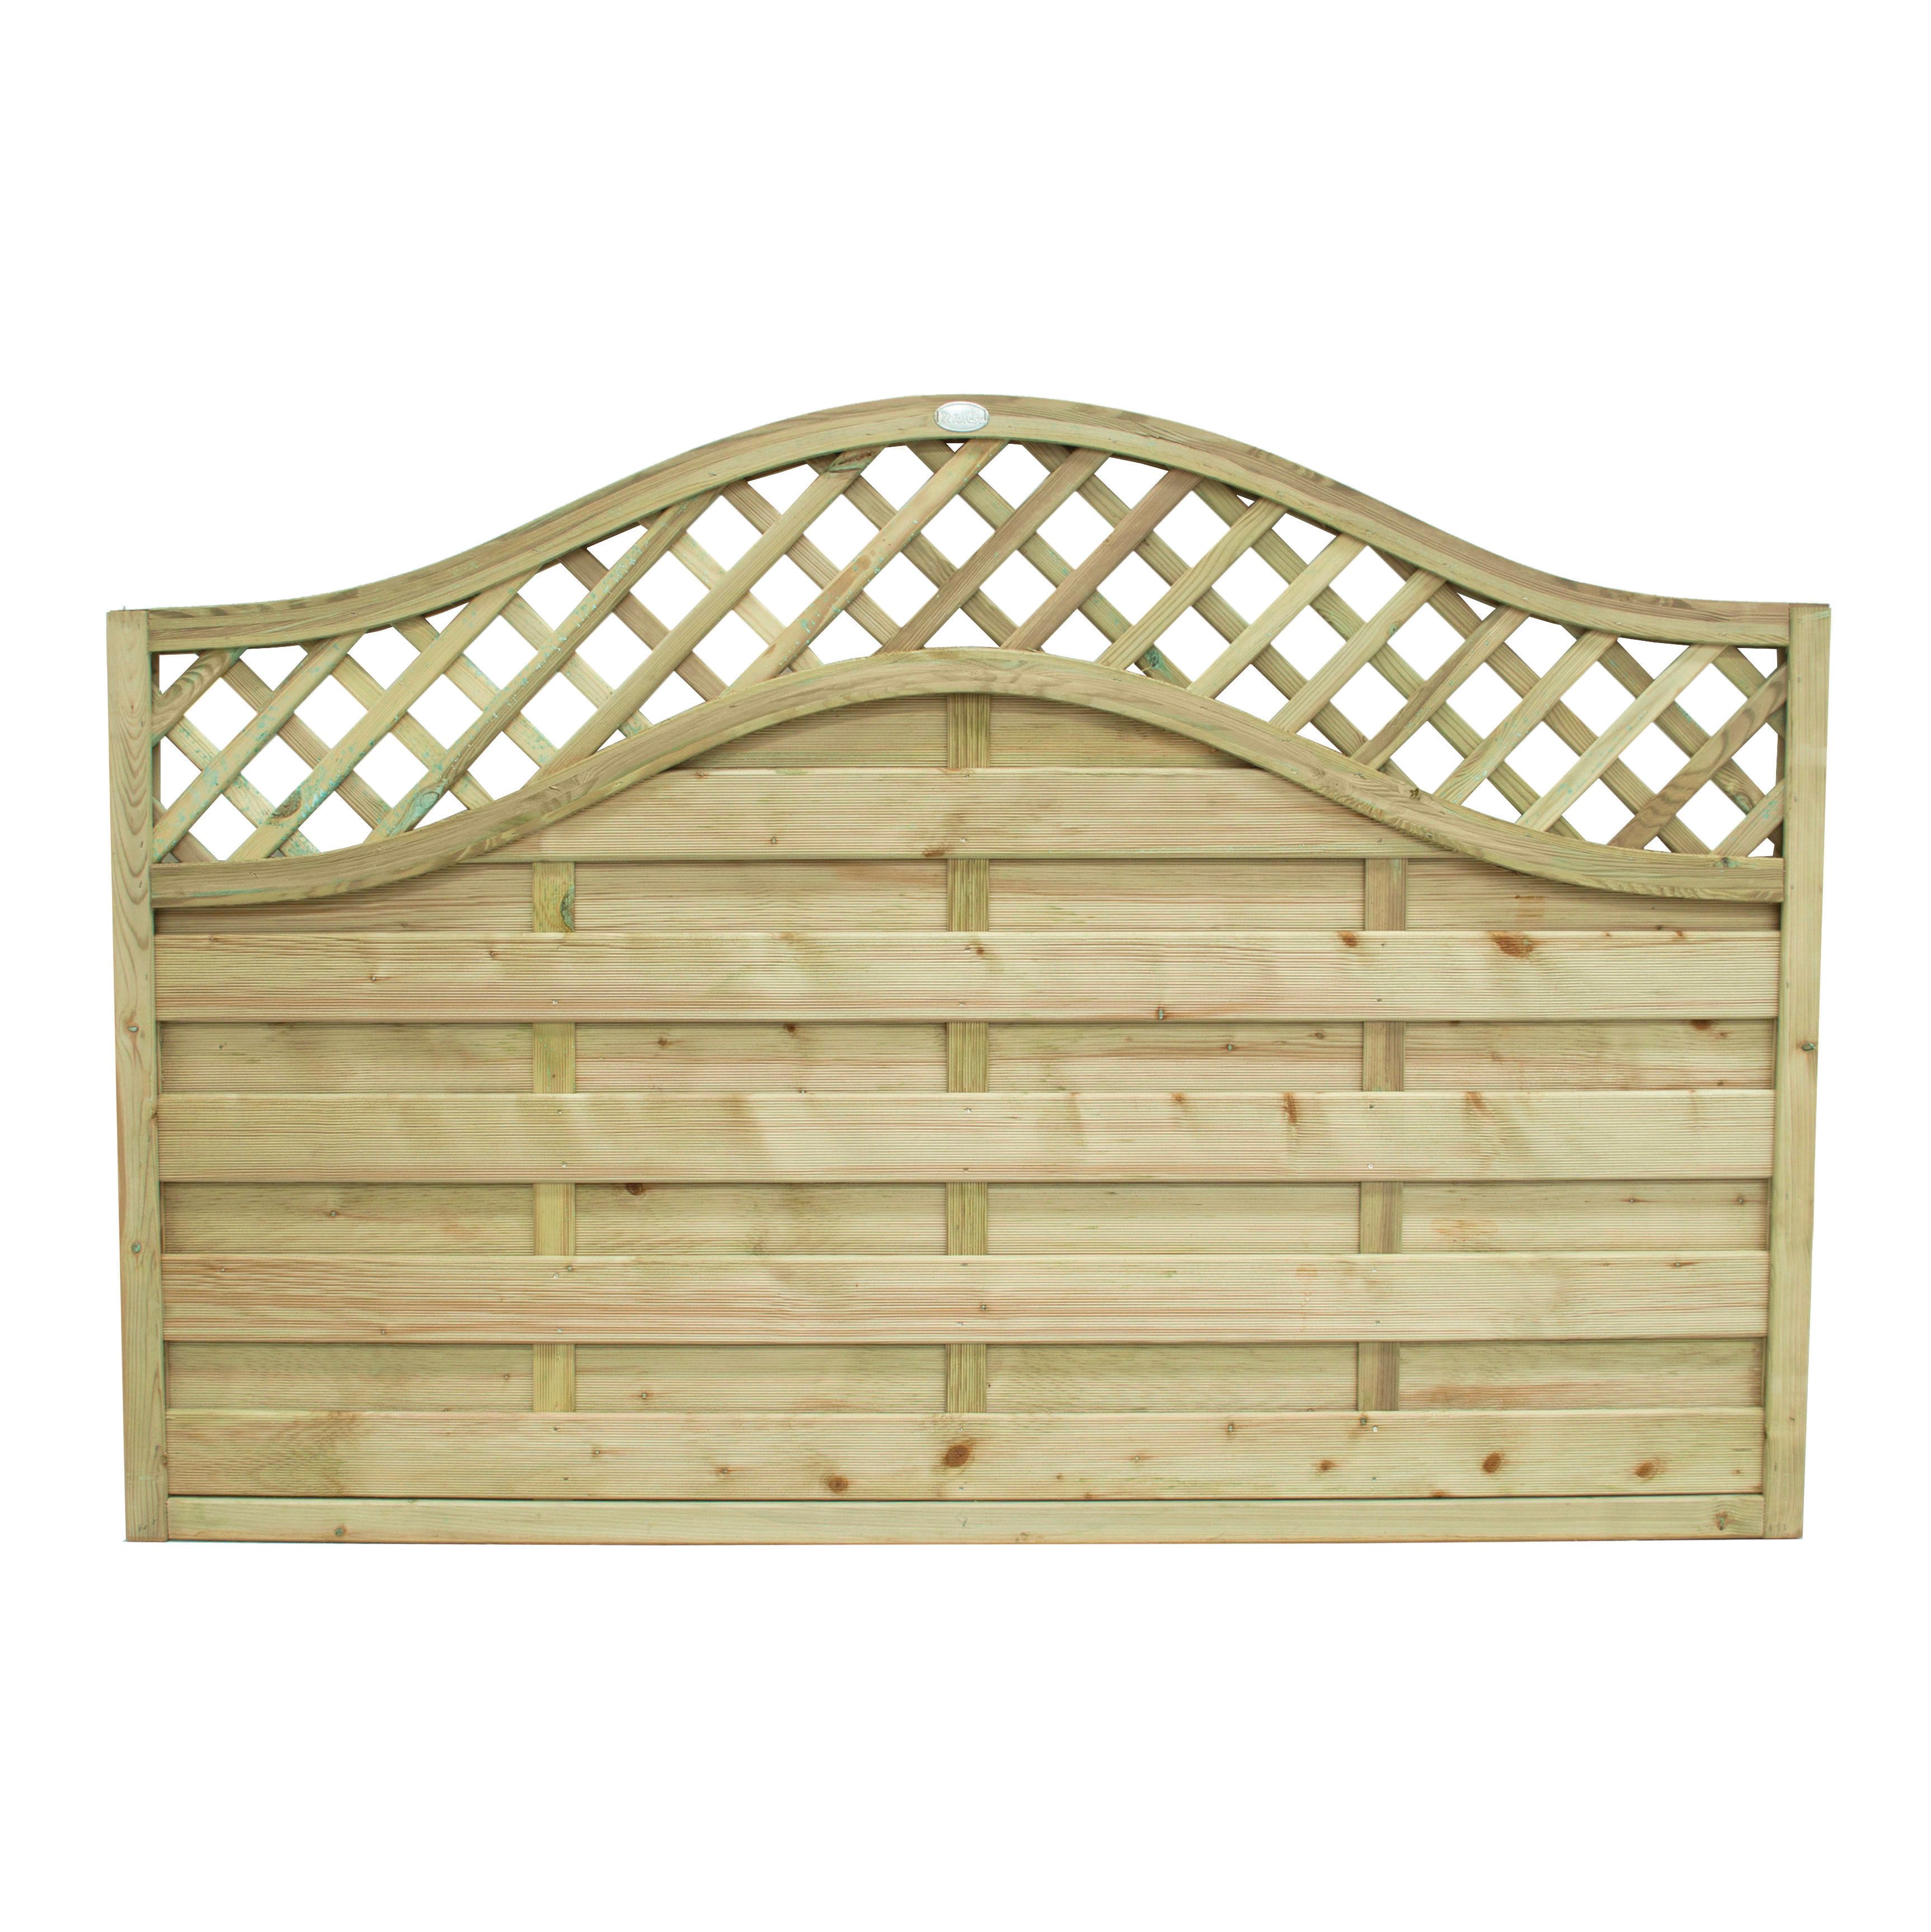 Image of Forest Garden Pressure Treated Bristol Fence Panel - 1800 x 1200mm - 6 x 4ft - Pack of 4